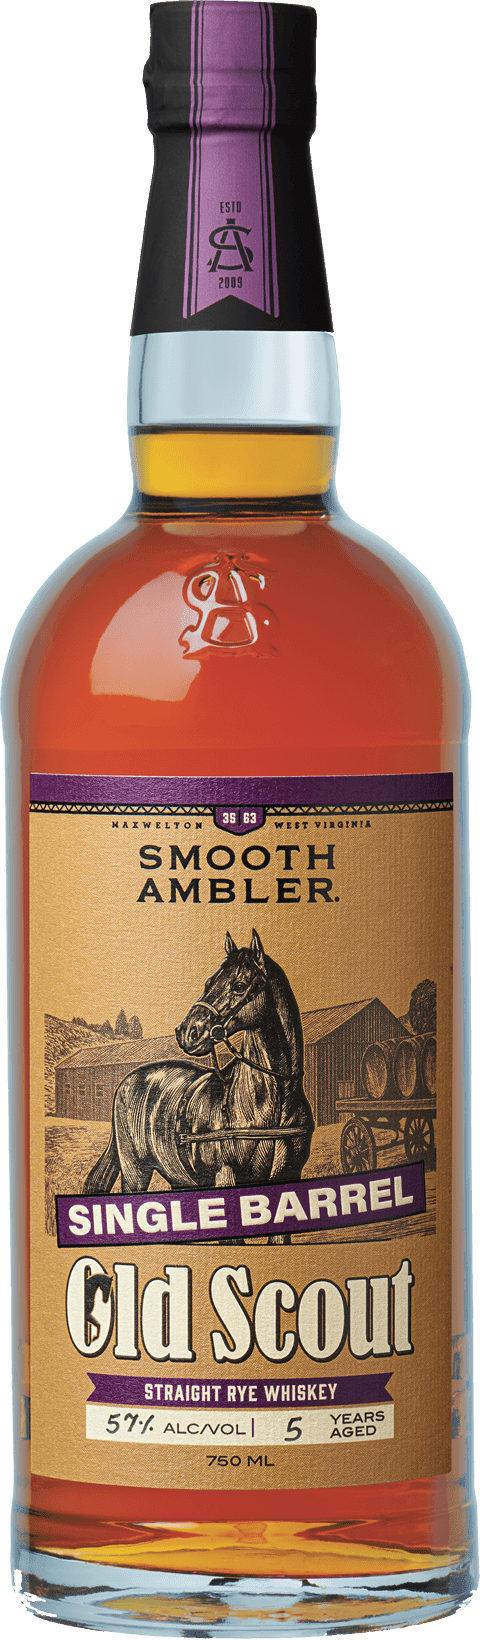 Smooth Amber Old Scout Single Barrel Straight Rye Whiskey